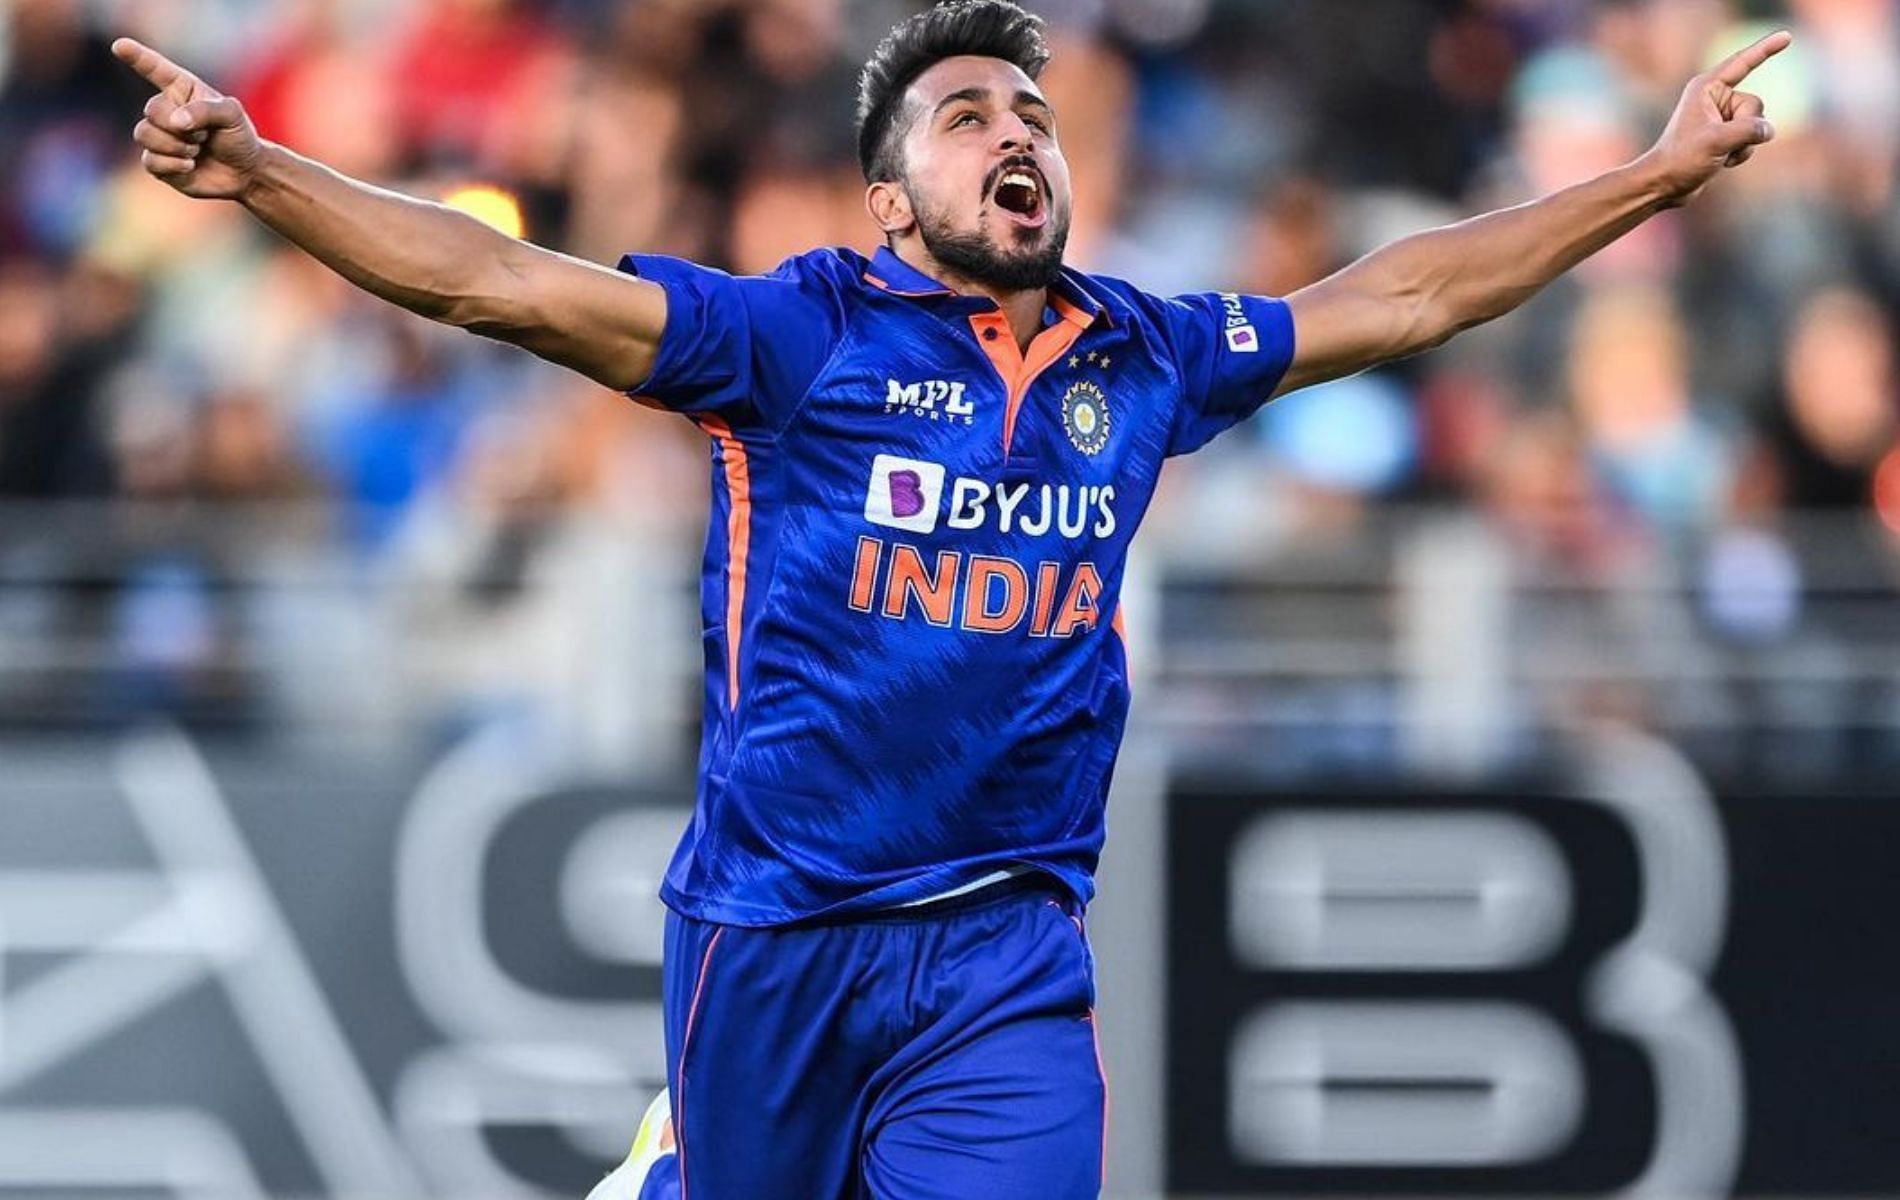 Umran Malik picked up two wickets in the 2nd ODI between India and Bangladesh. (Pic: Getty)